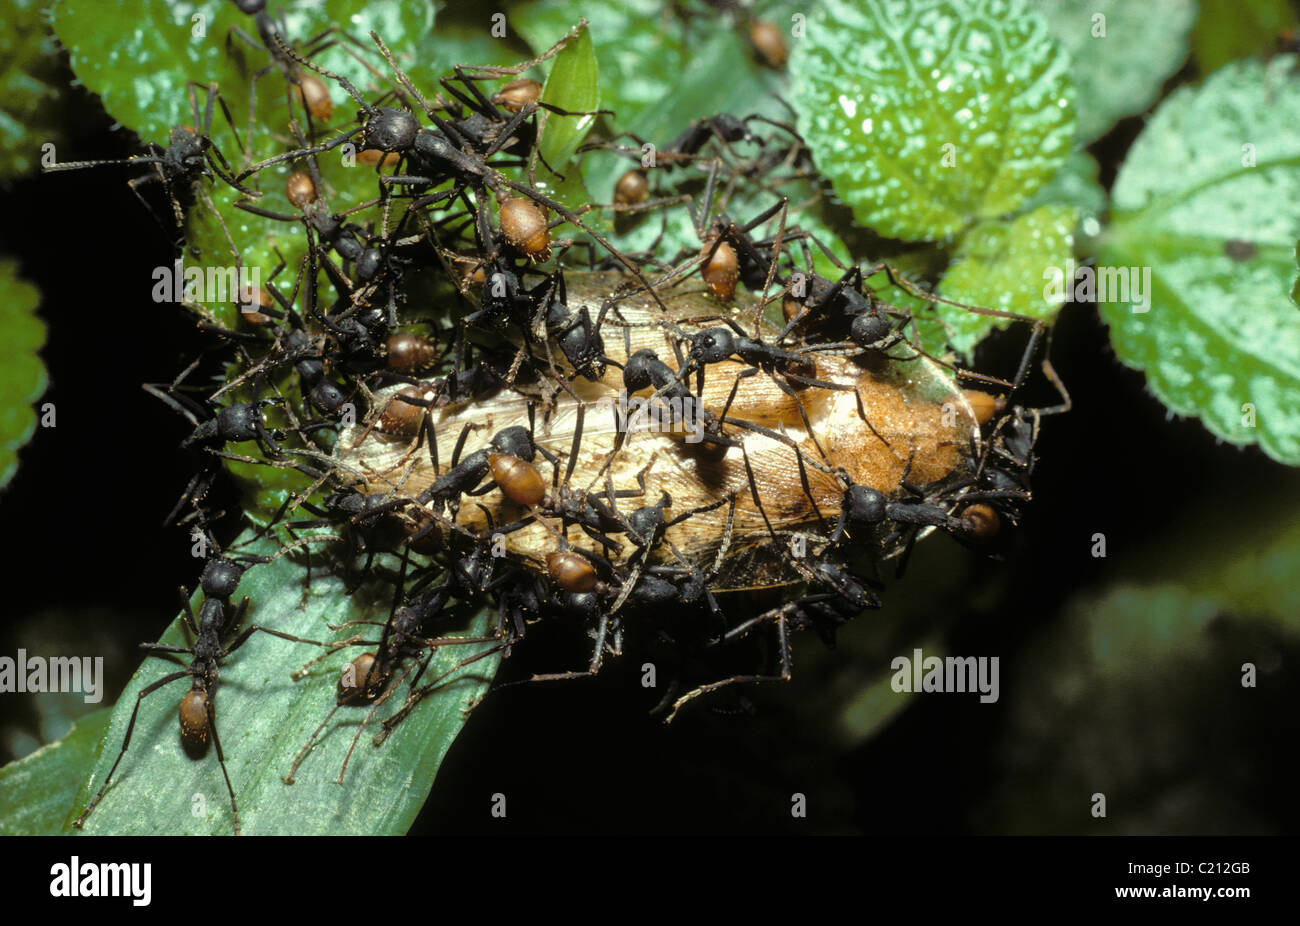 Army ant (Eciton burchelli: Formicidae) workers attacking a cockroach, in rainforest, Trinidad Stock Photo